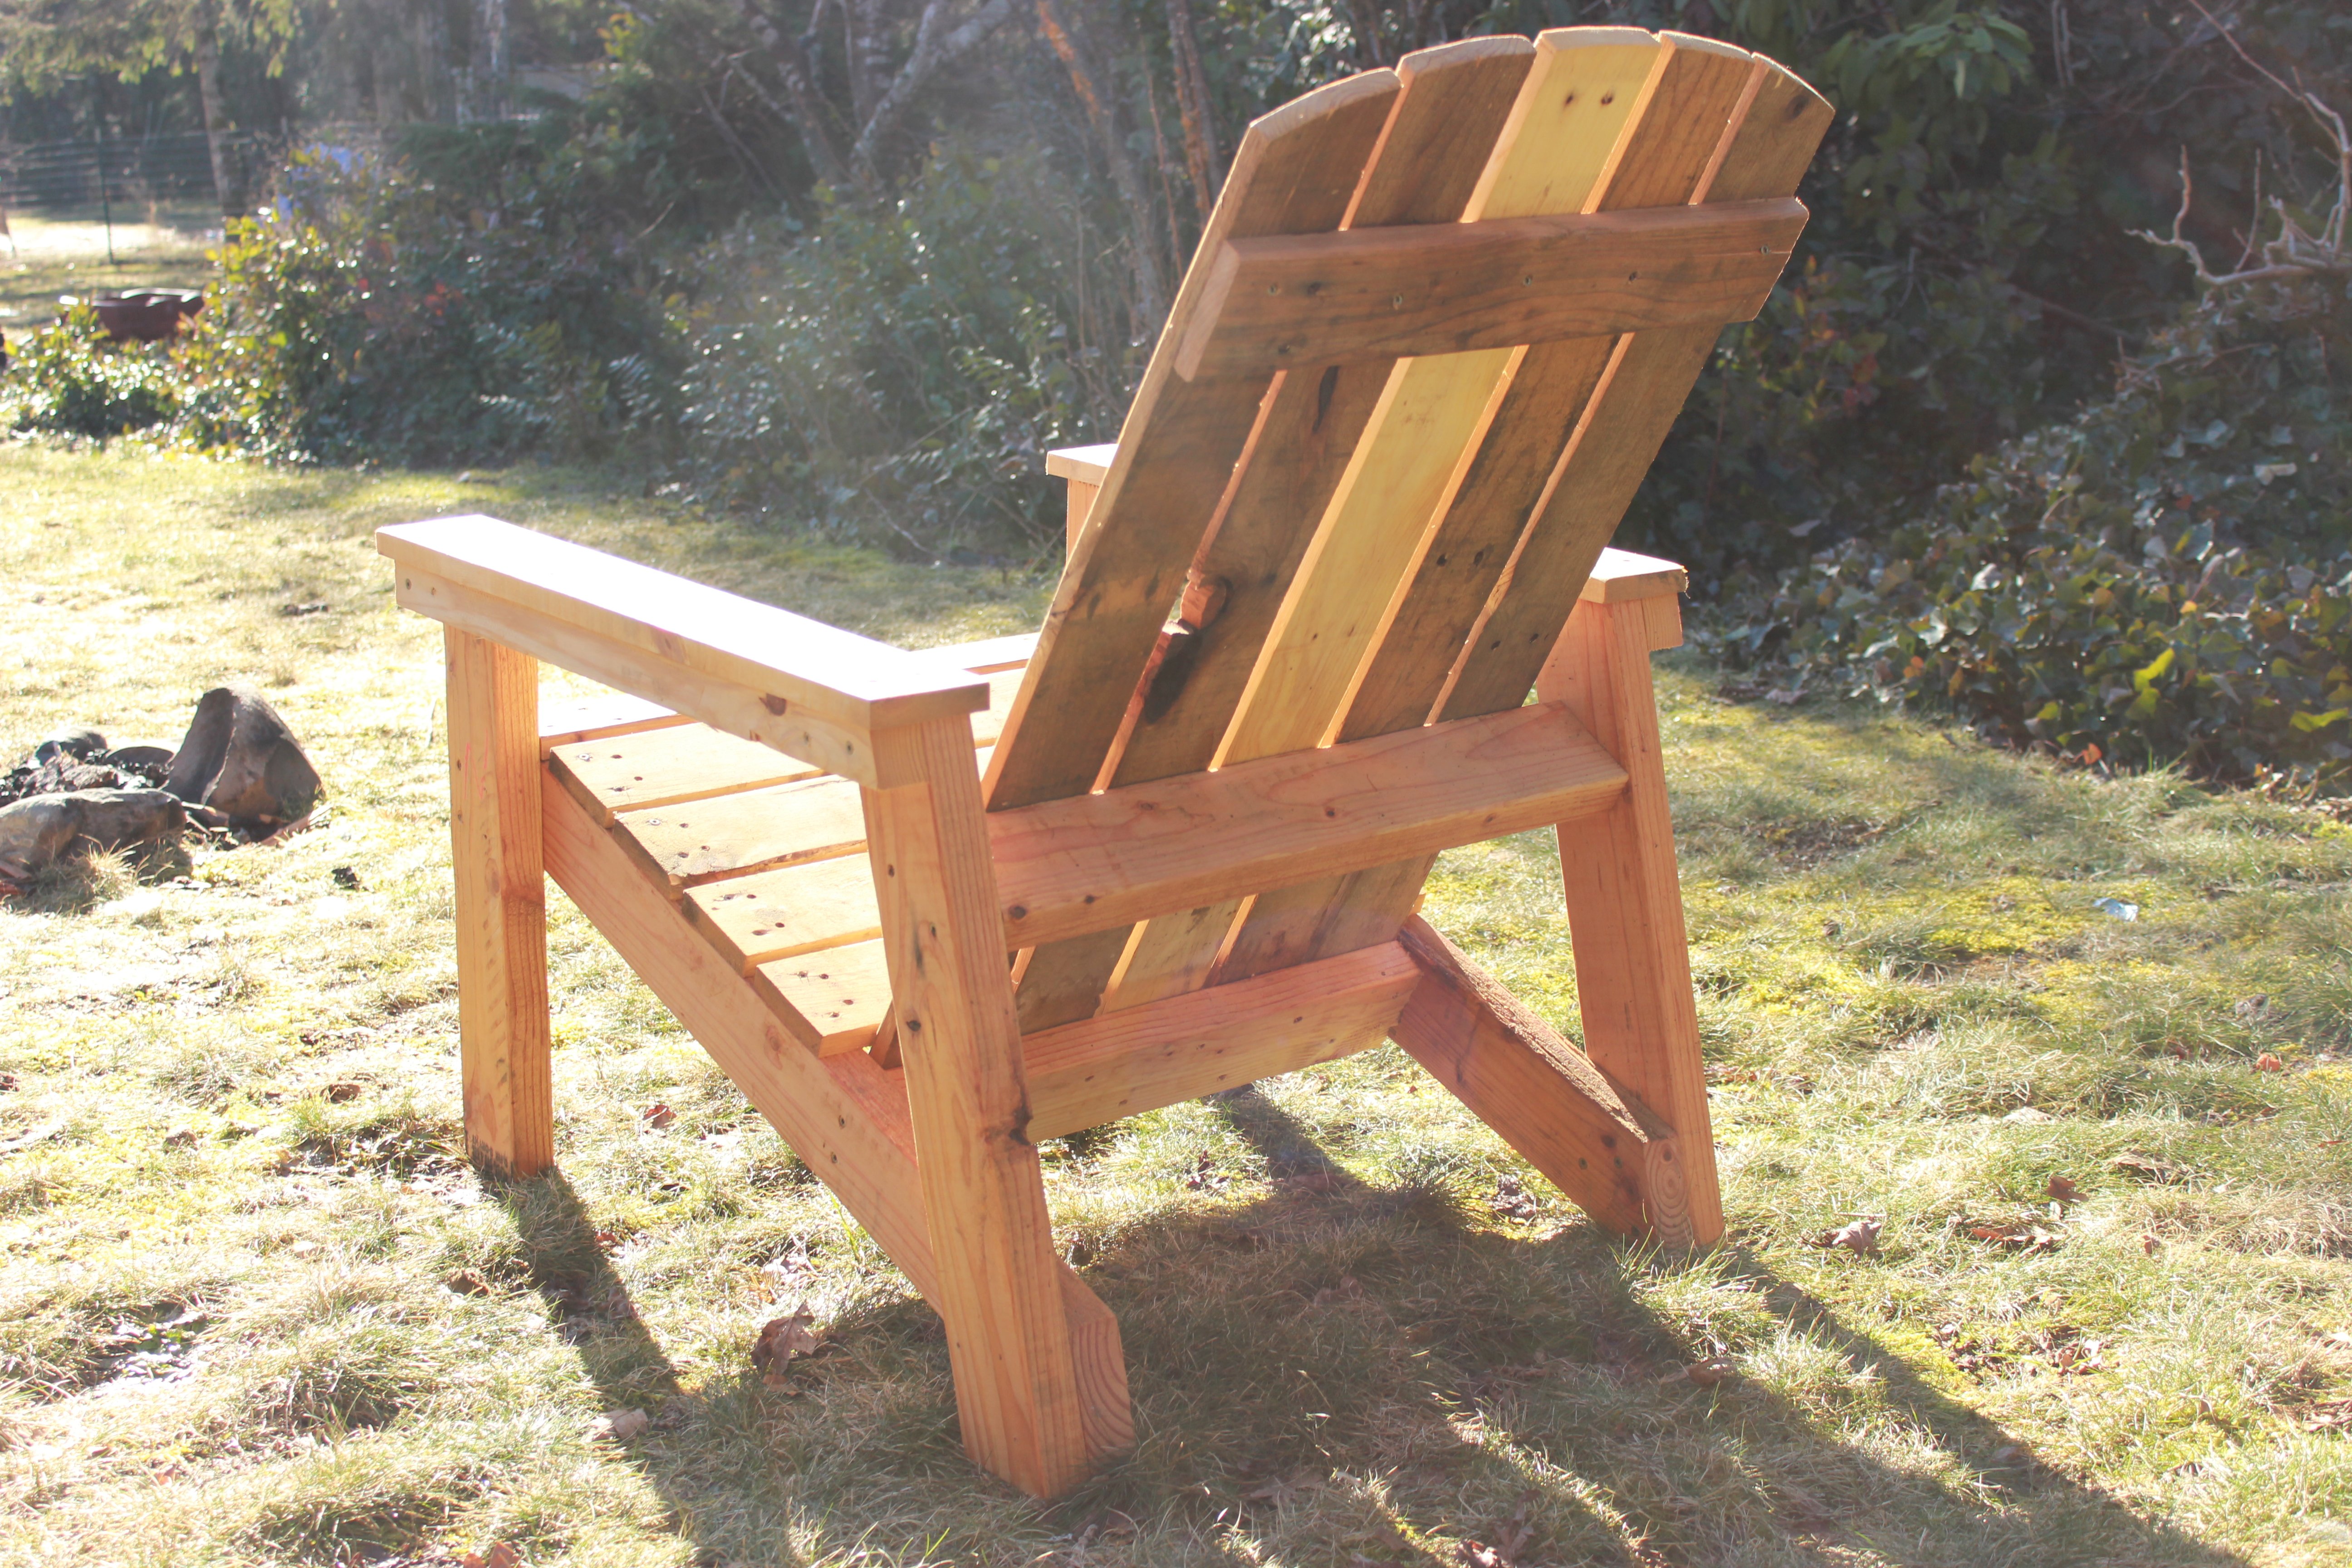 ana-white-adirondack-chair-from-pallets-diy-projects